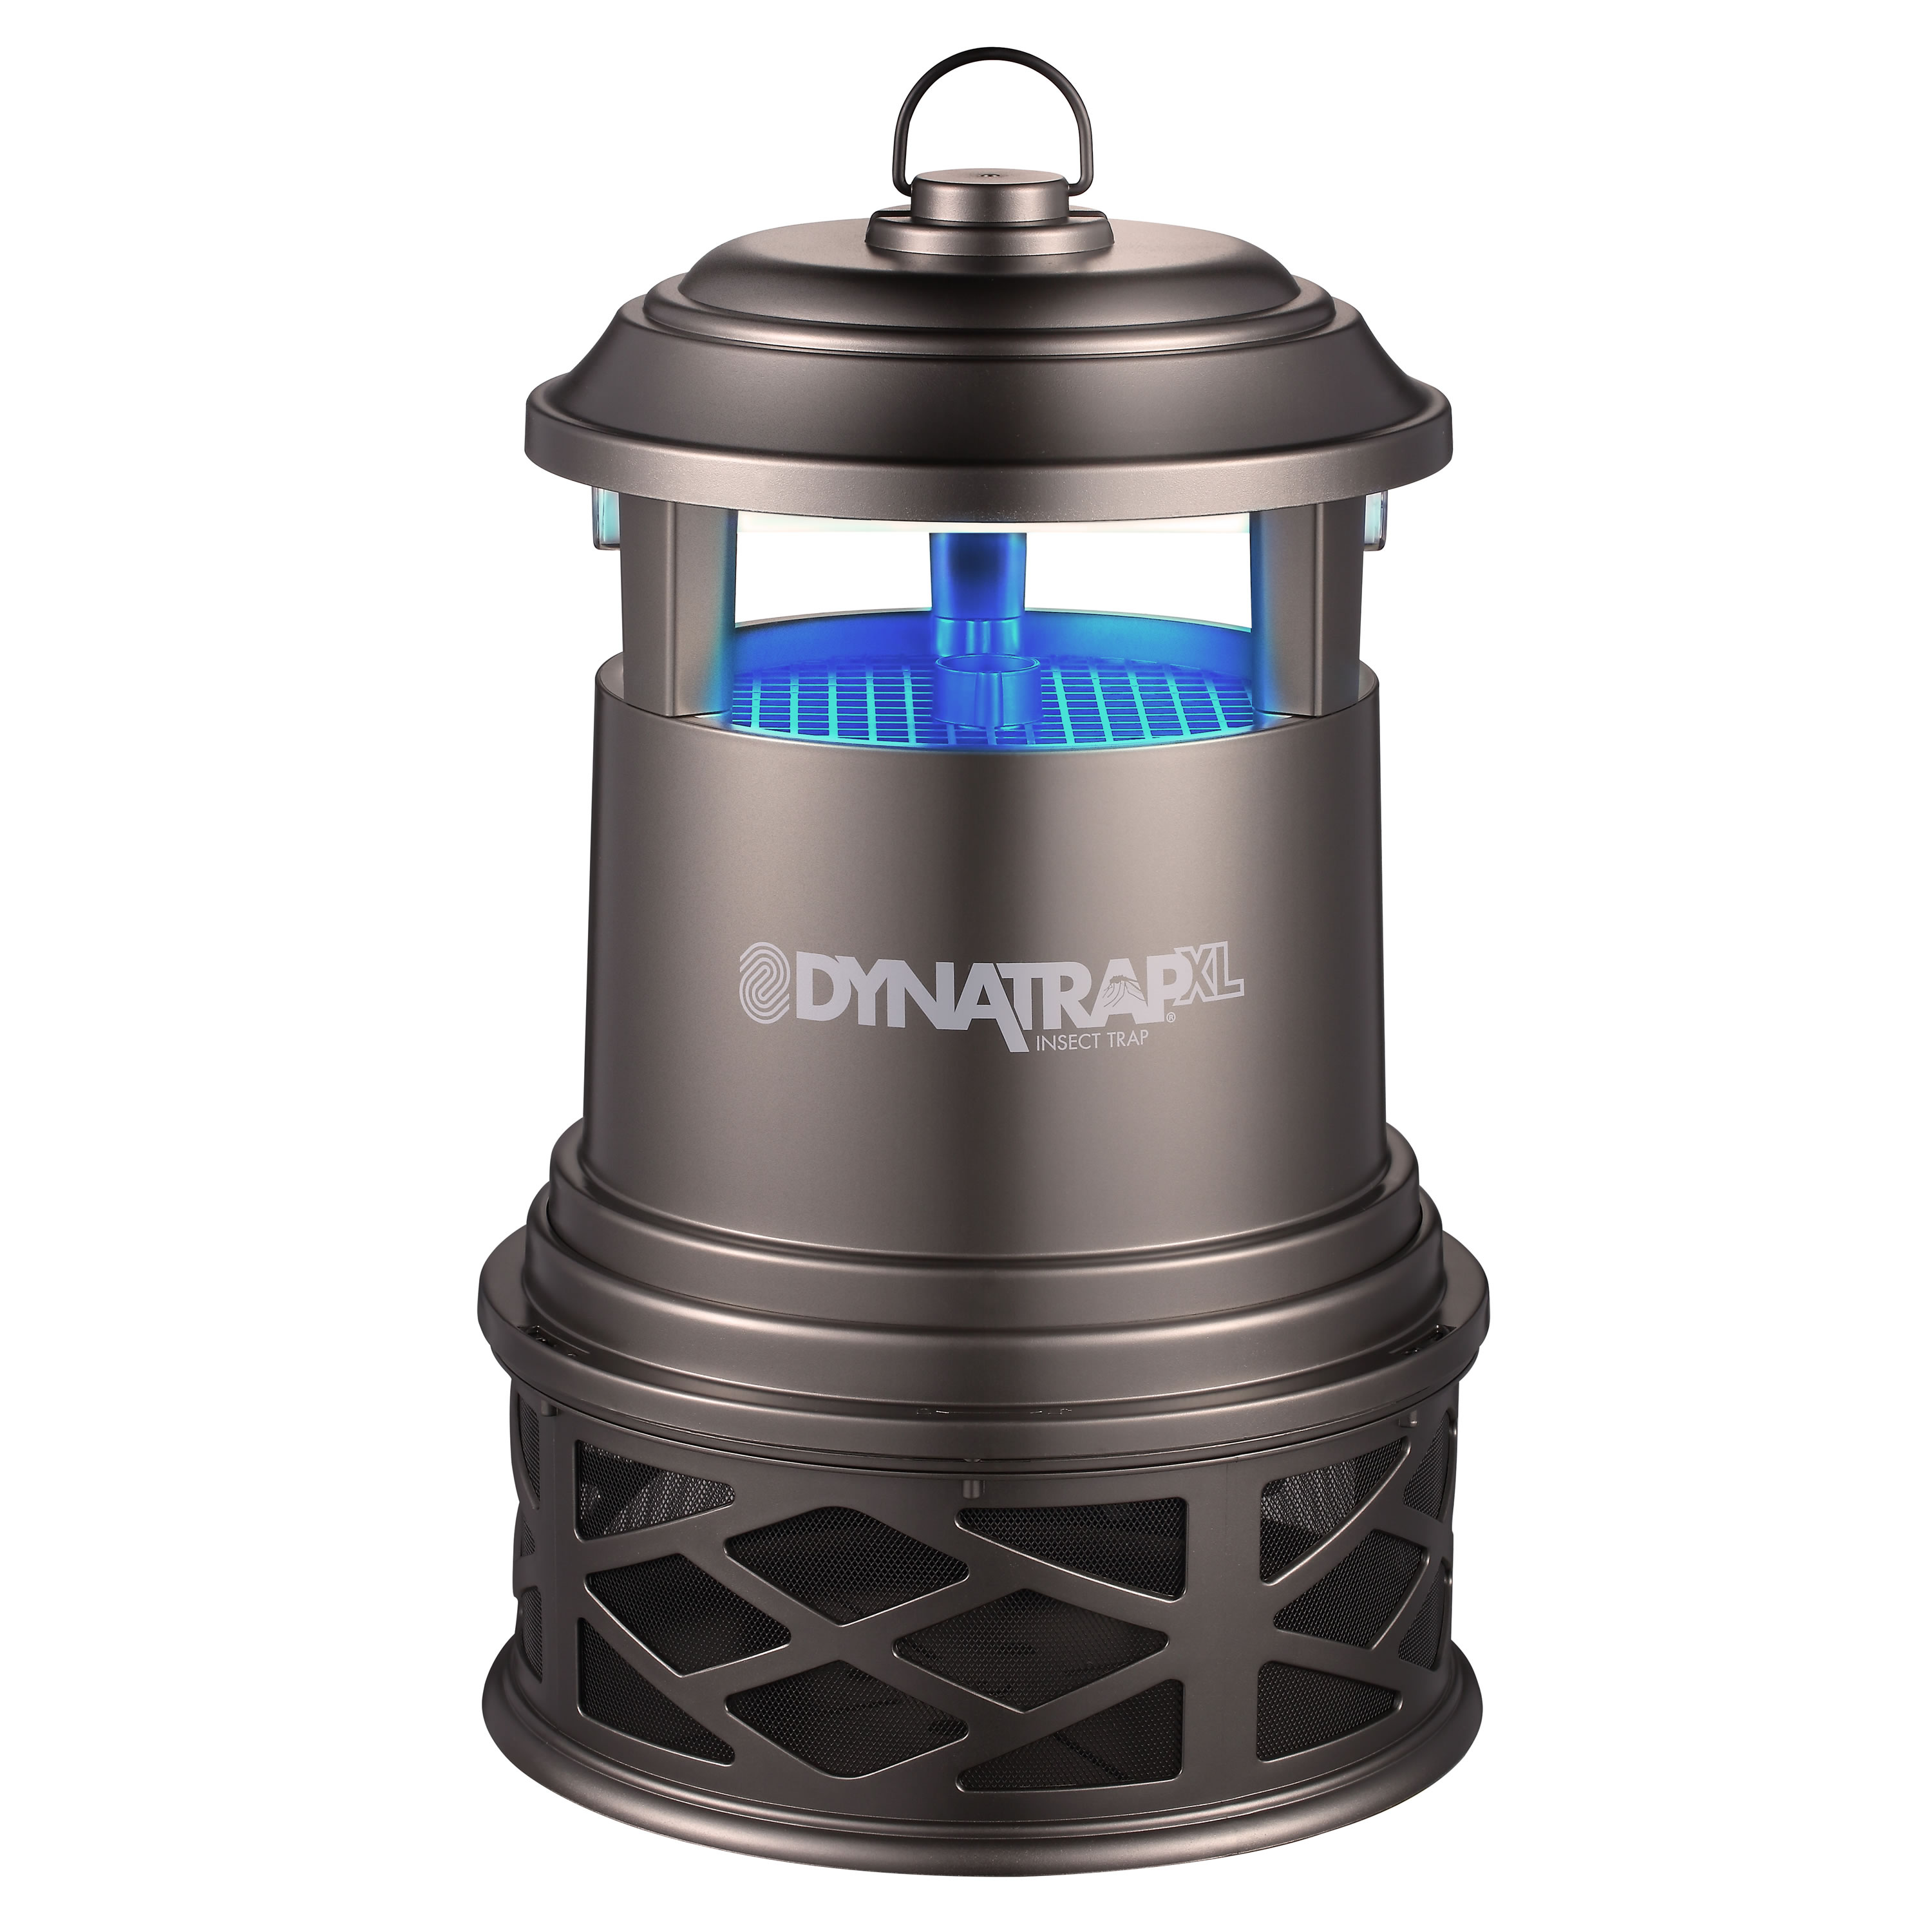 DynaTrap 1-Acre Tungsten Outdoor Insect Trap in the Insect Traps